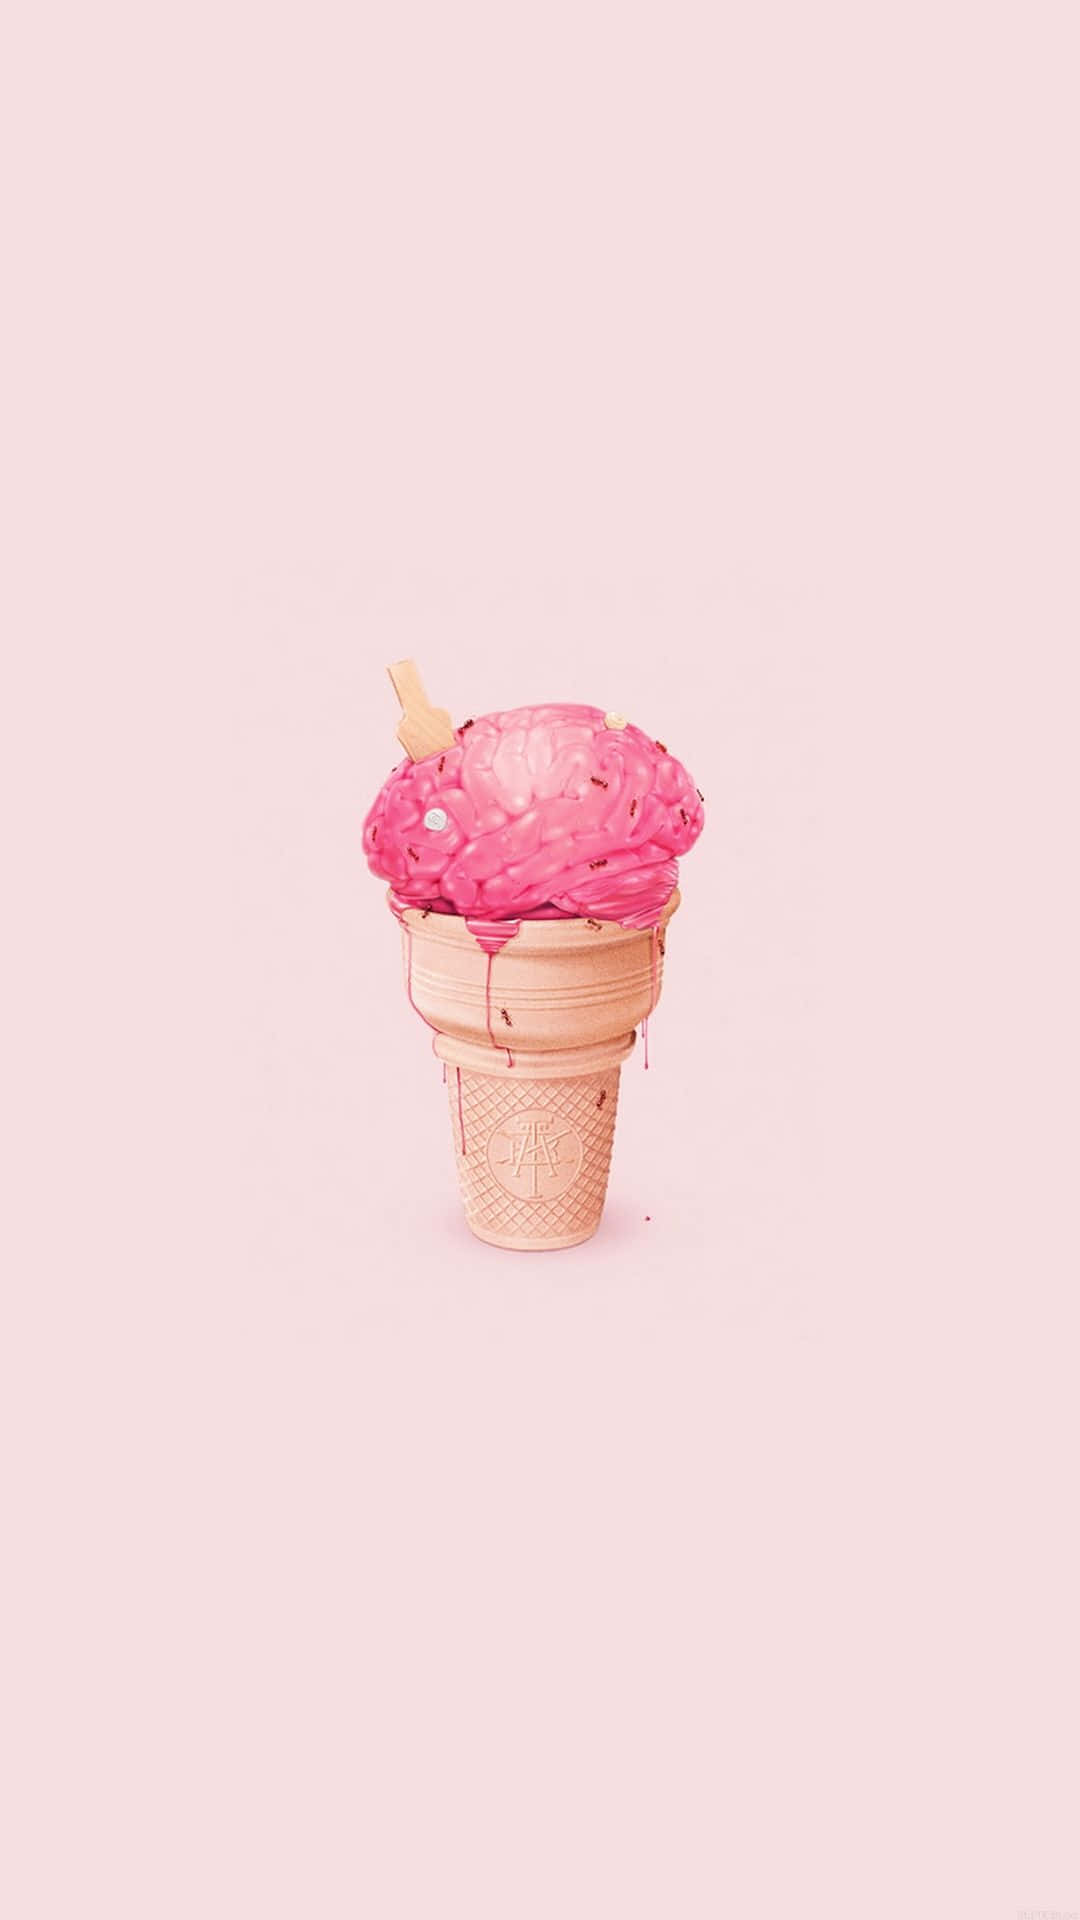 Simple And Cute iPhone Ice Cream Wallpaper